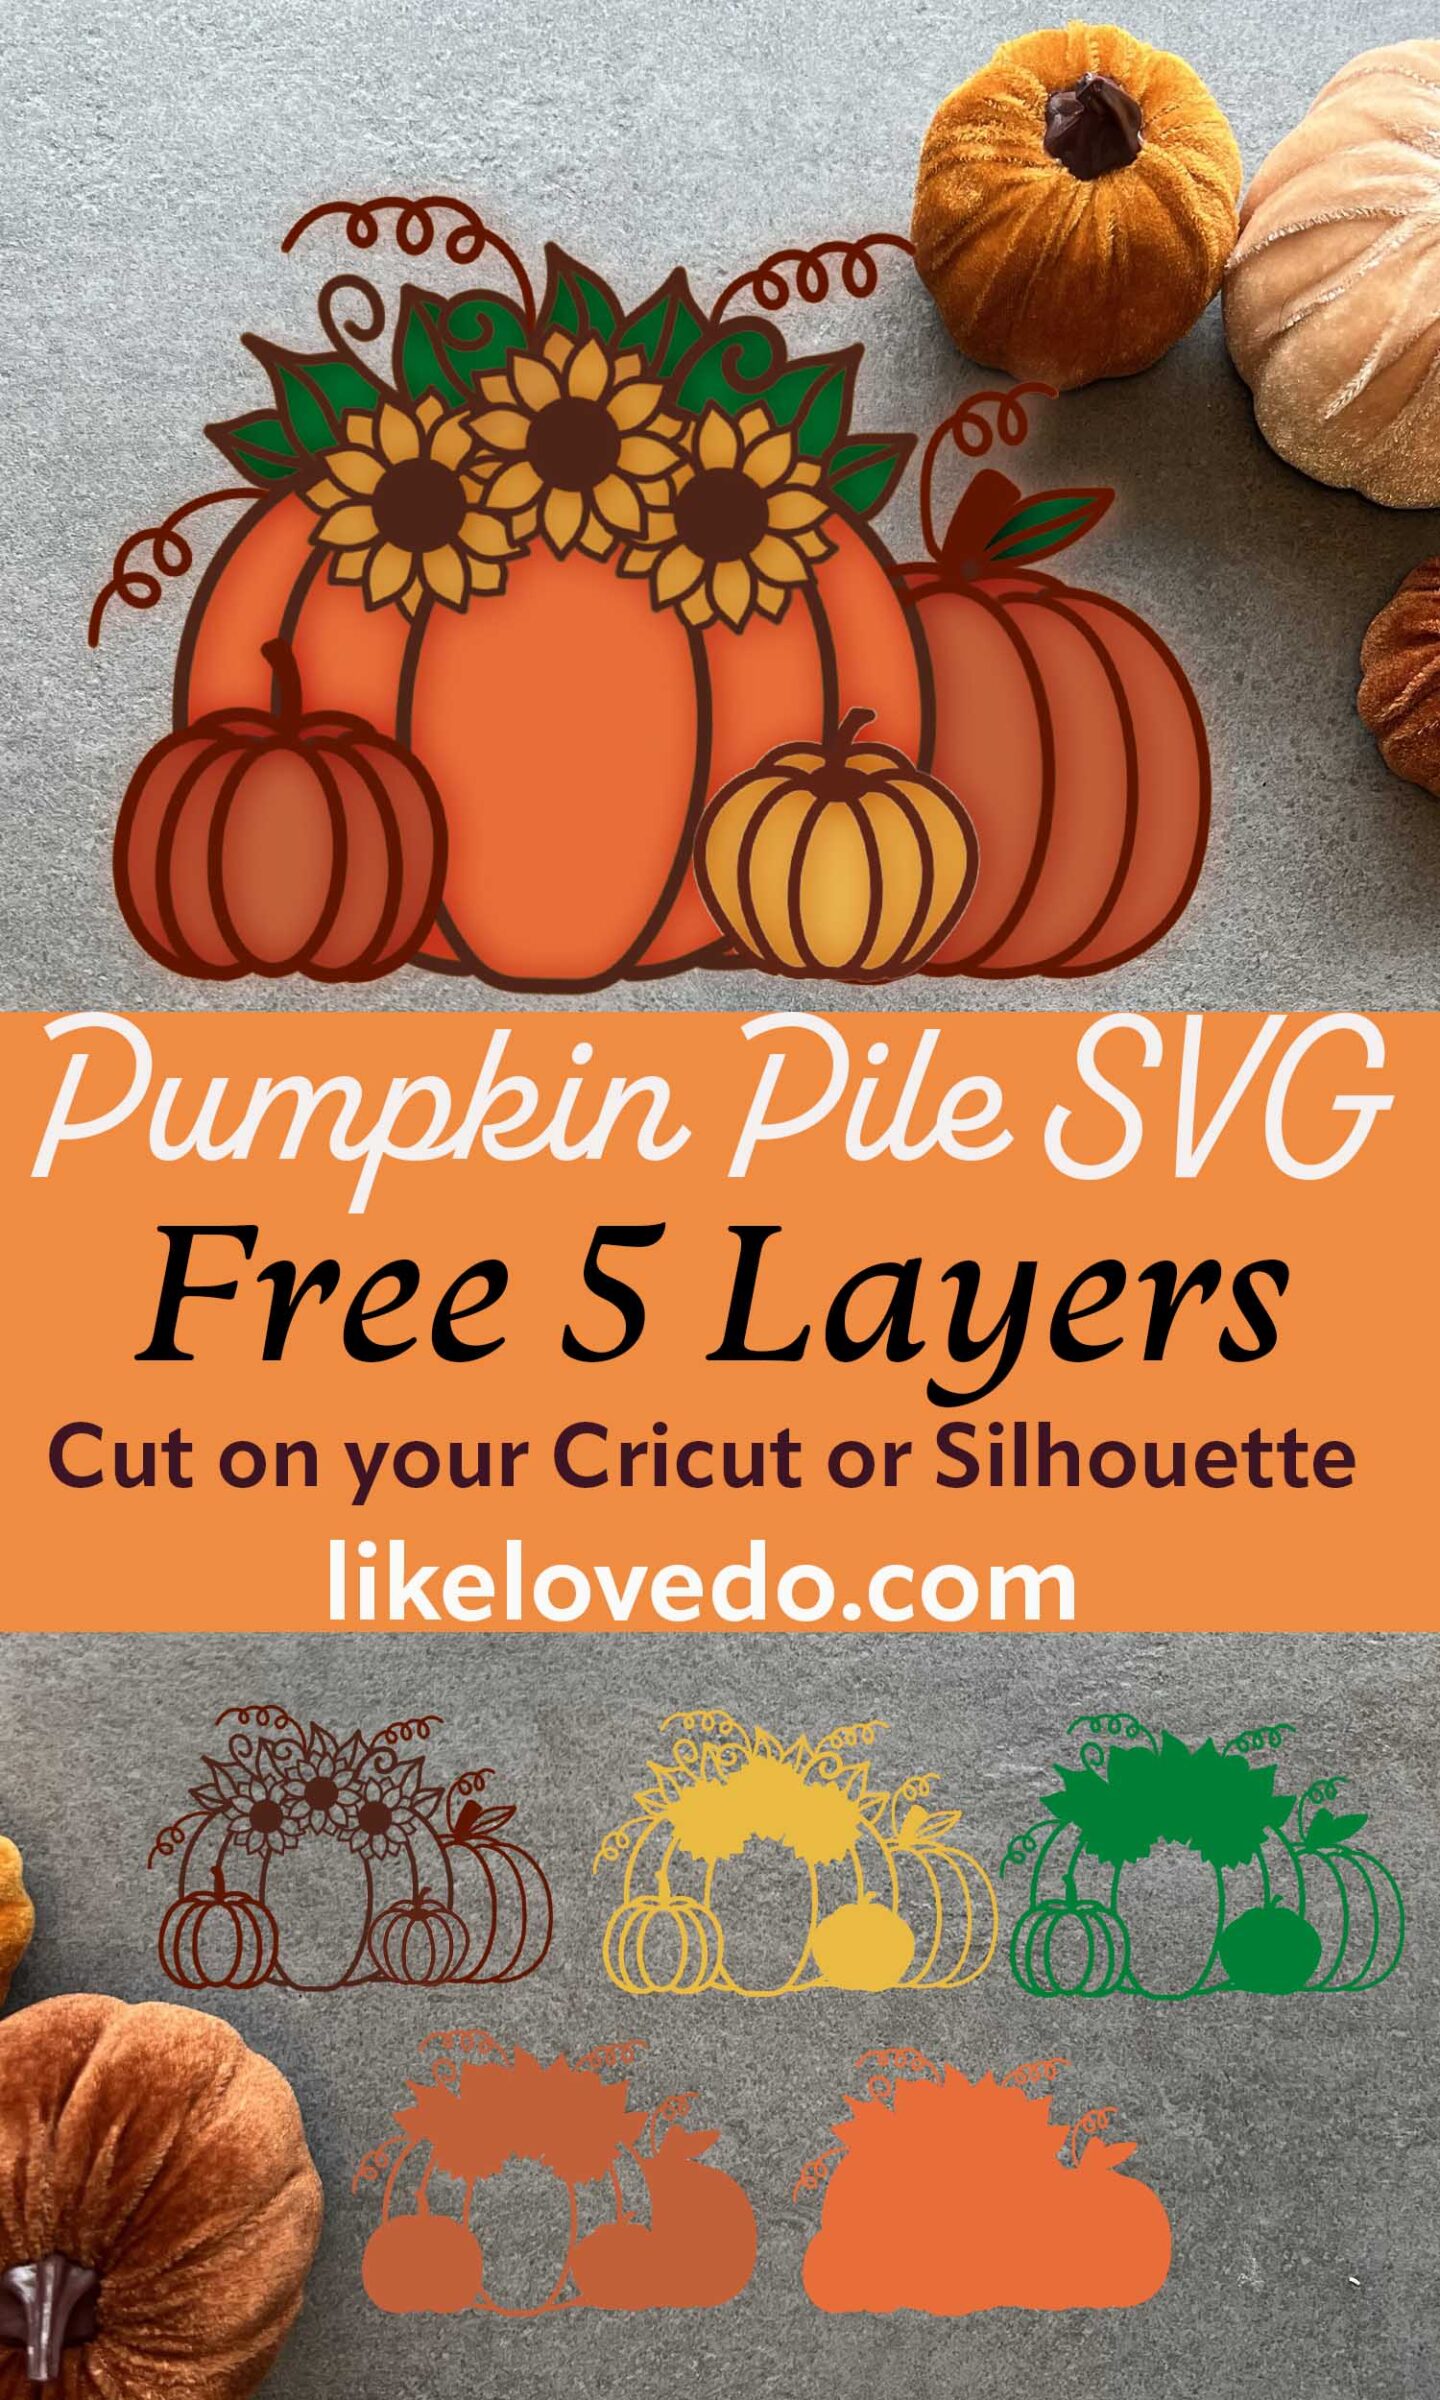 Free 5 Layer Layered Pumpkin Pile SVG Pin image with pumpkins and sunflowers cut file